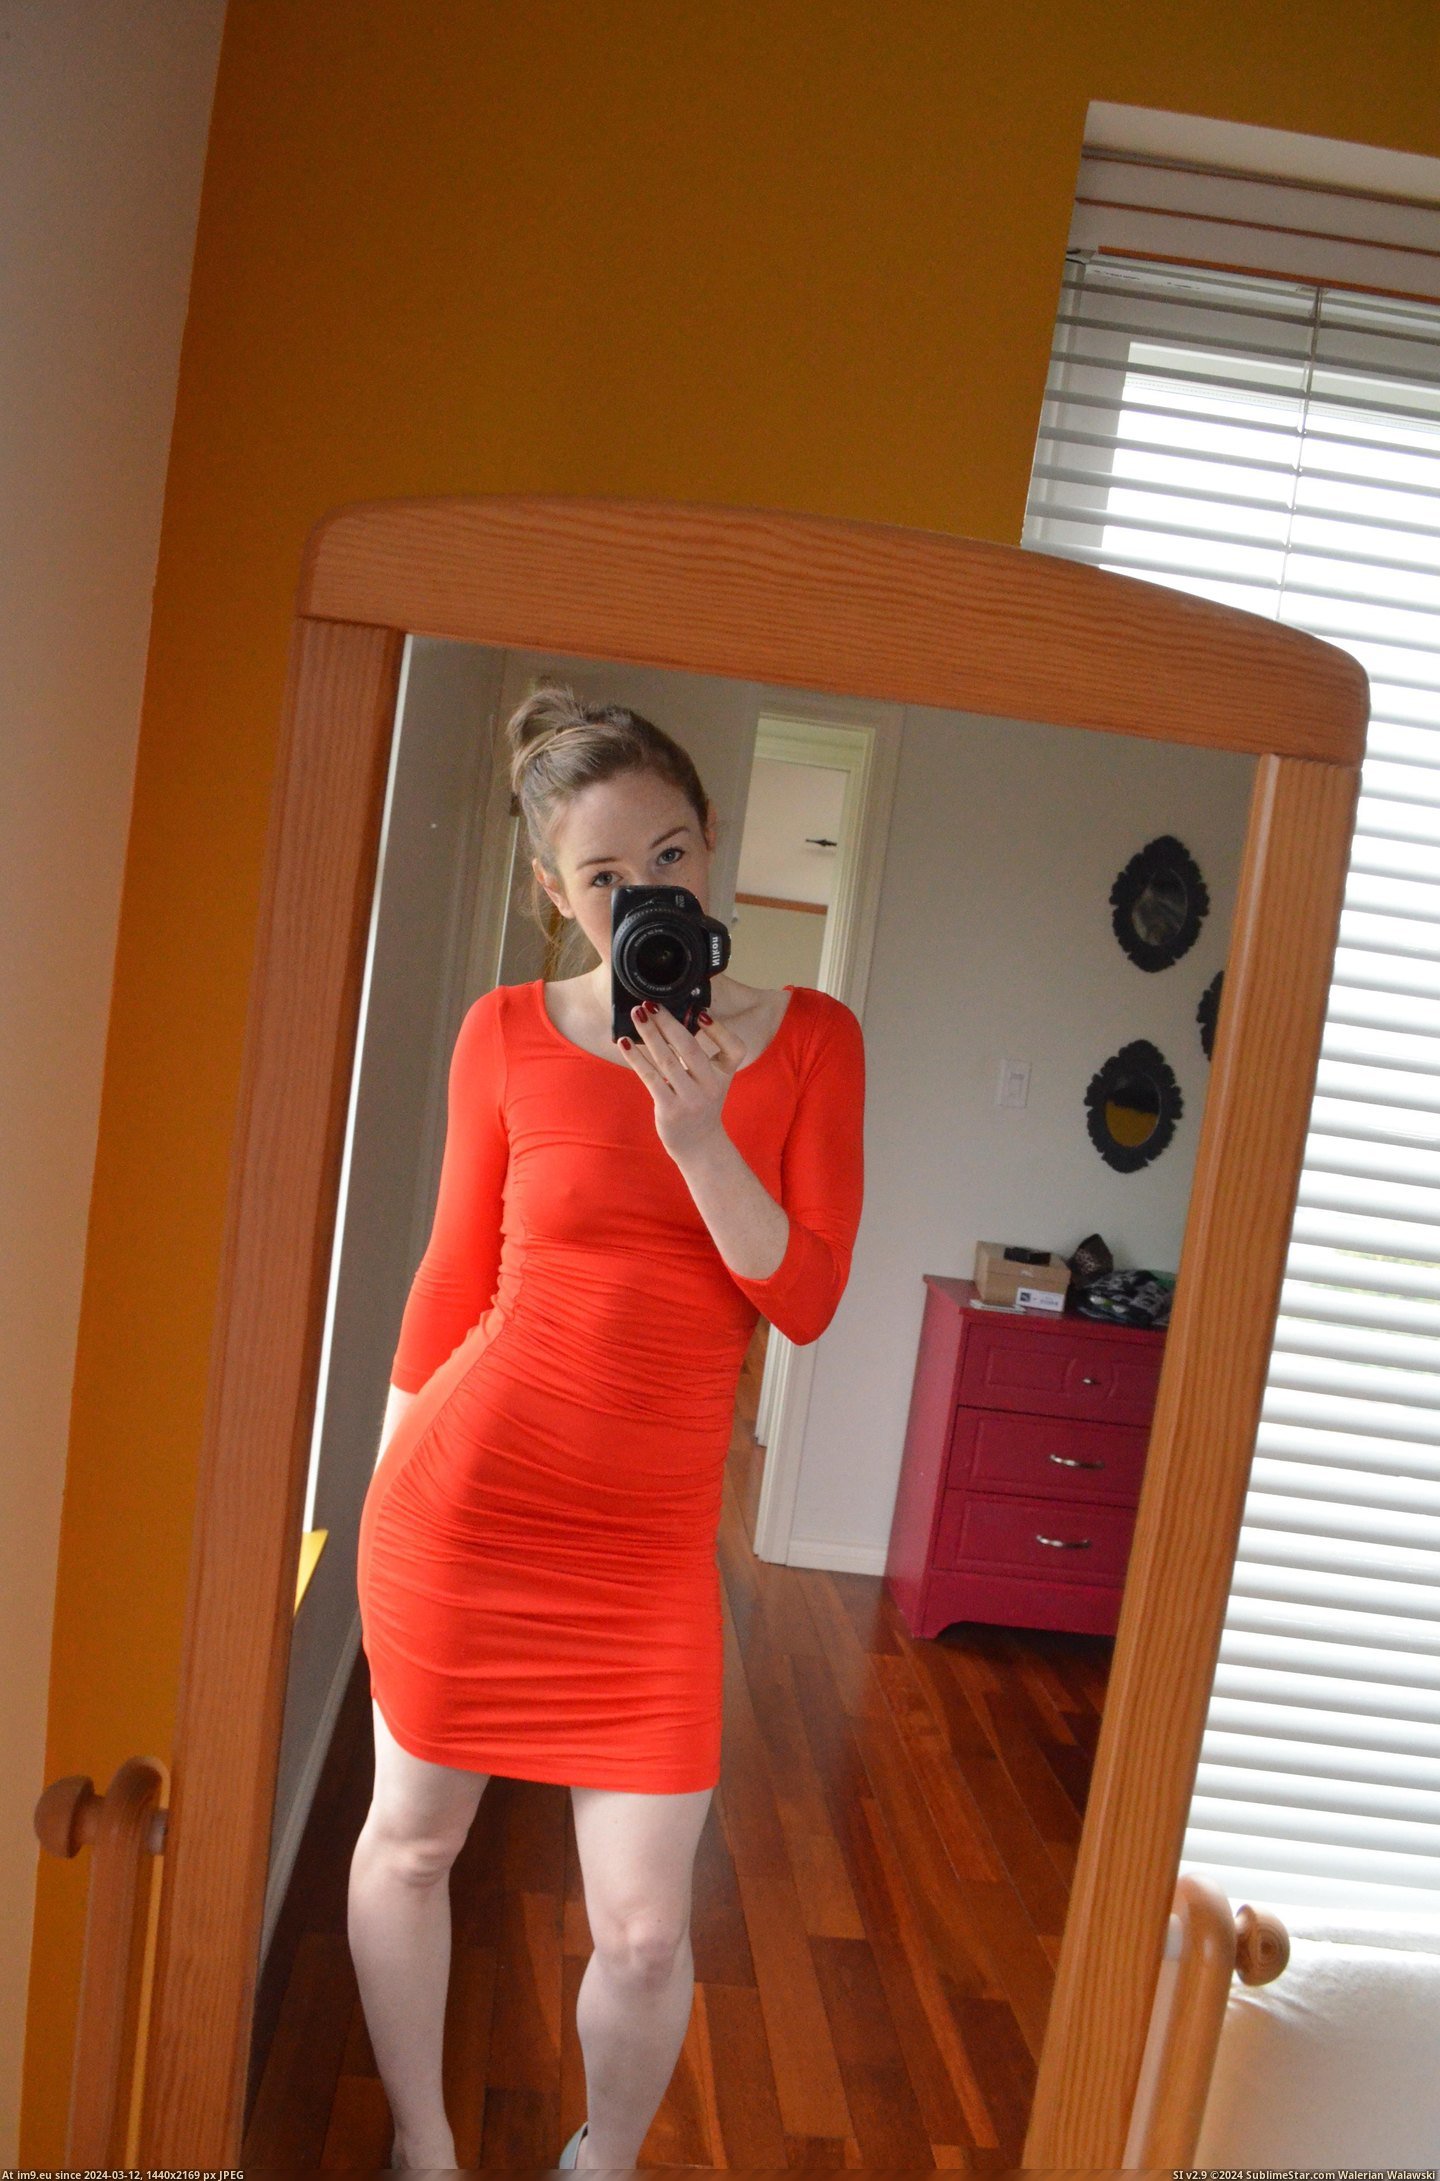 #Tight #Dress #Xmas #Too #Party [Gonewild] Is this dress too tight [f]or an Xmas party? 3 Pic. (Изображение из альбом My r/GONEWILD favs))